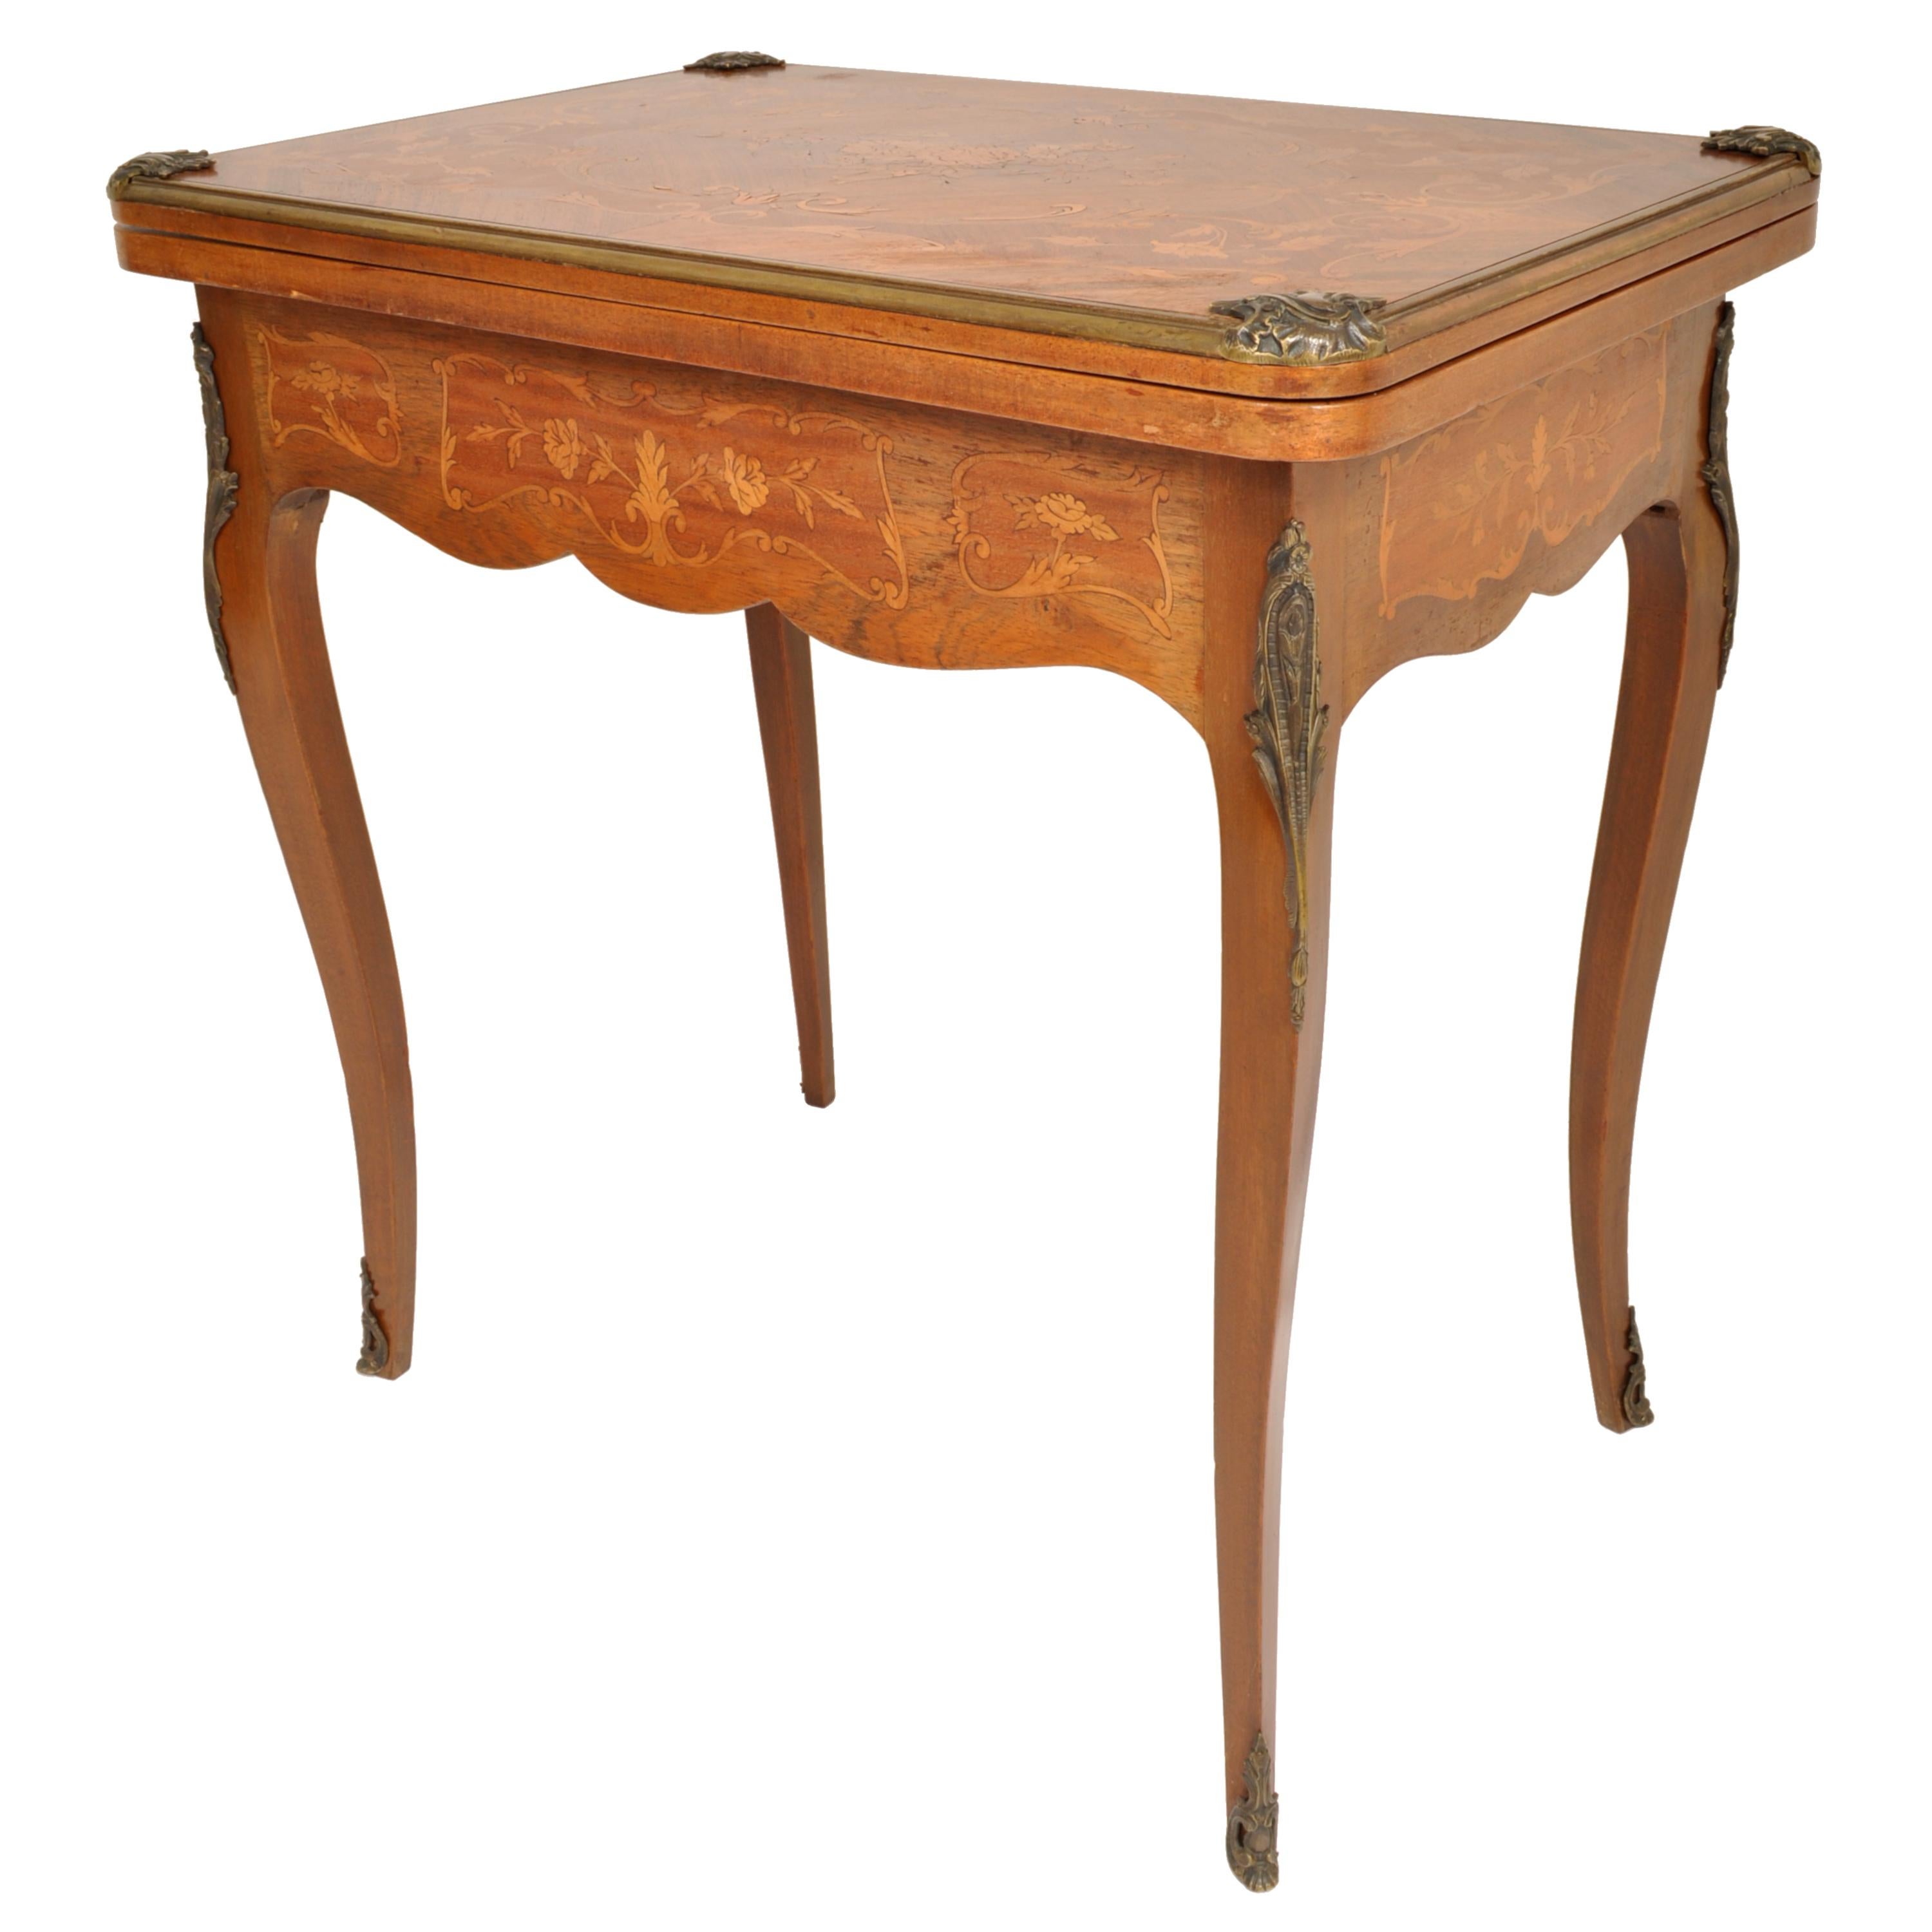 Gilt Antique French Louis XVI Walnut Fruitwood Inlaid Ormolu Card Games Table, 1880 For Sale